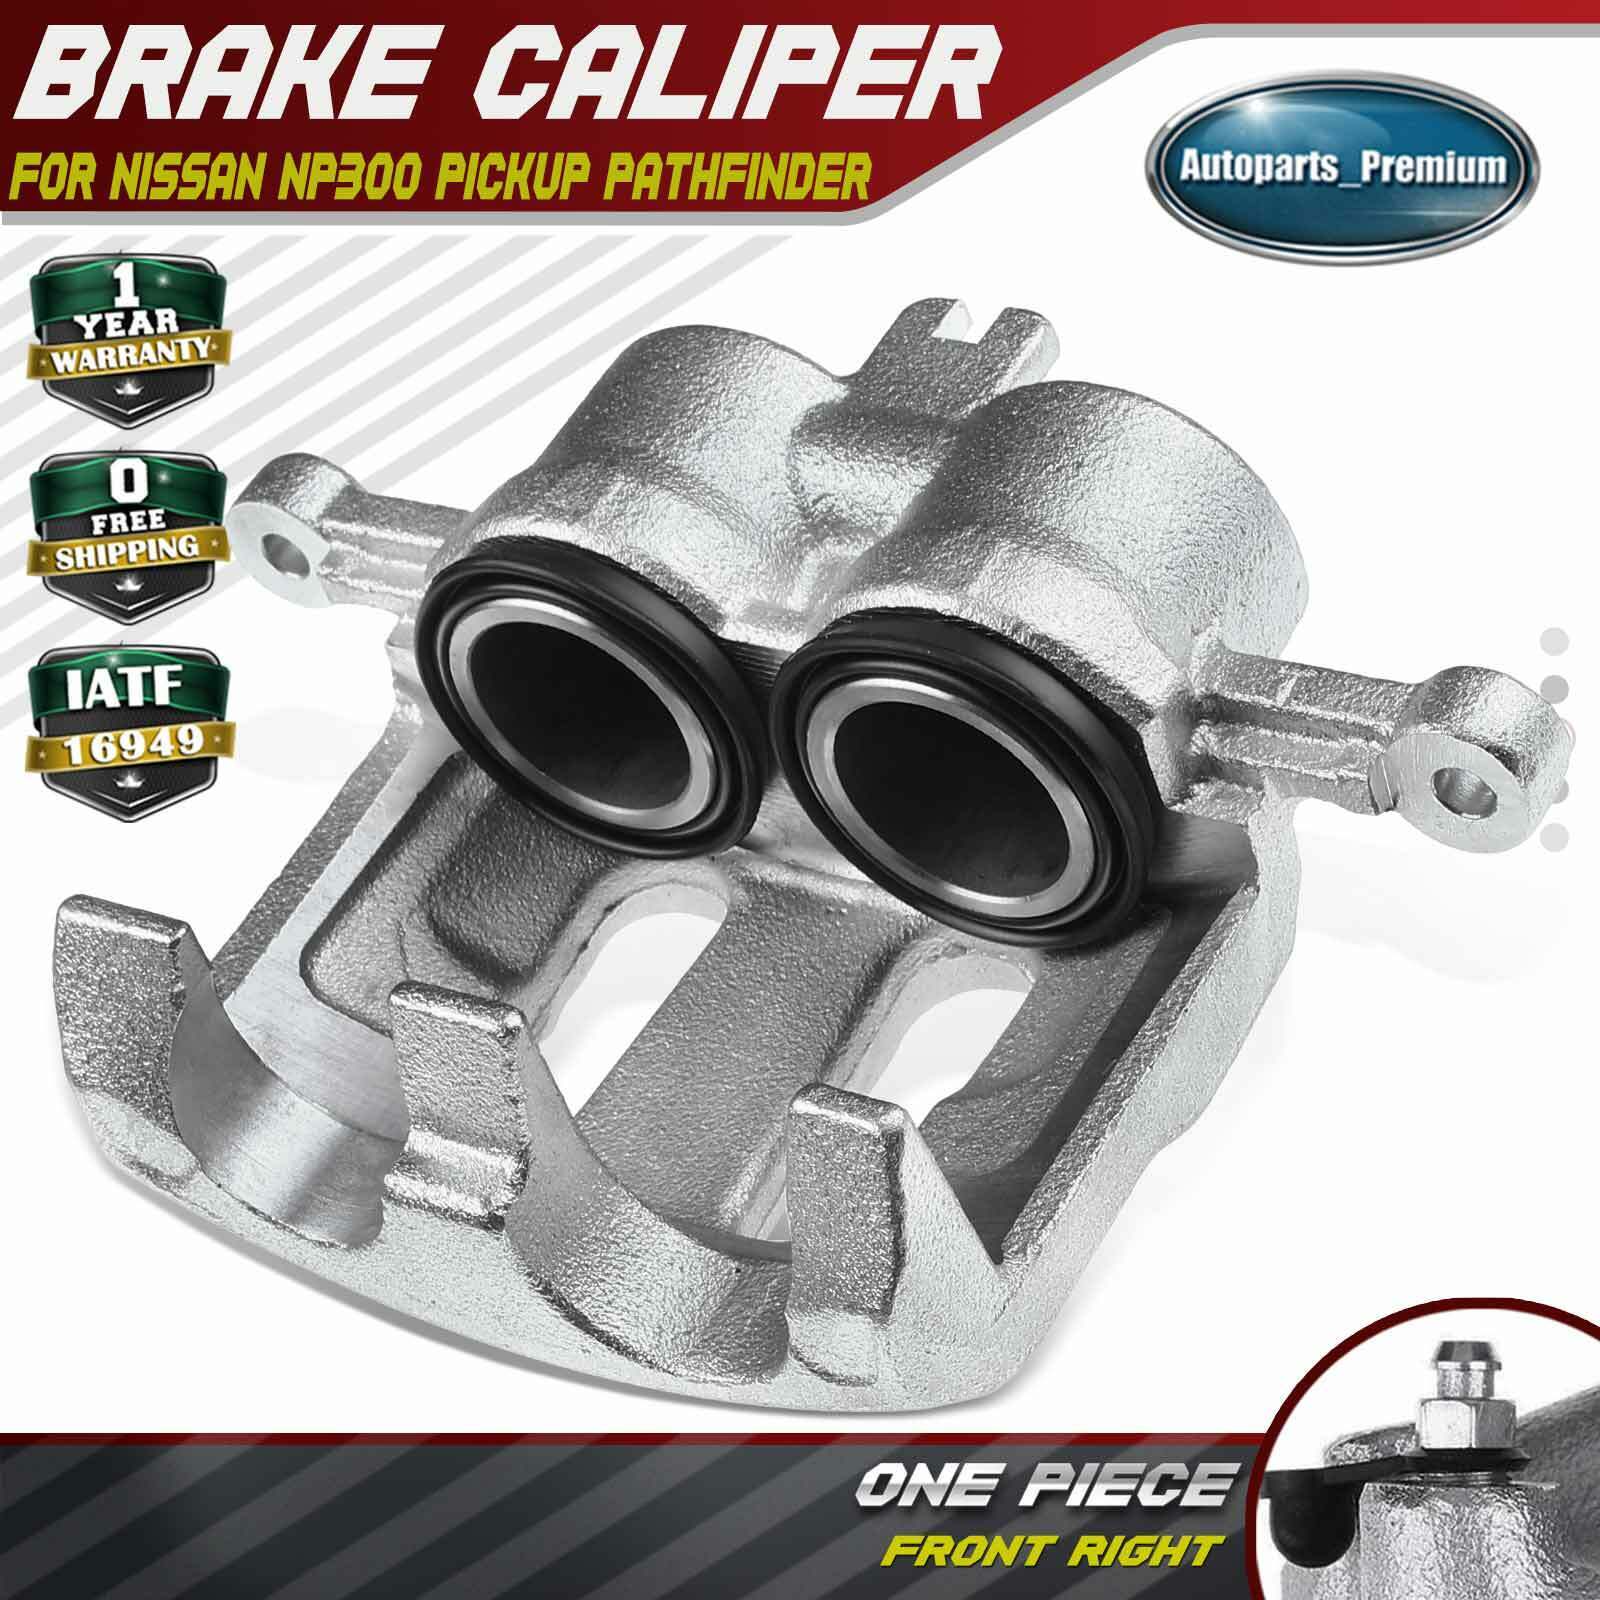 Brake Caliper without Bracket for Nissan NP300 D21 Pickup Pathfinder Front Right